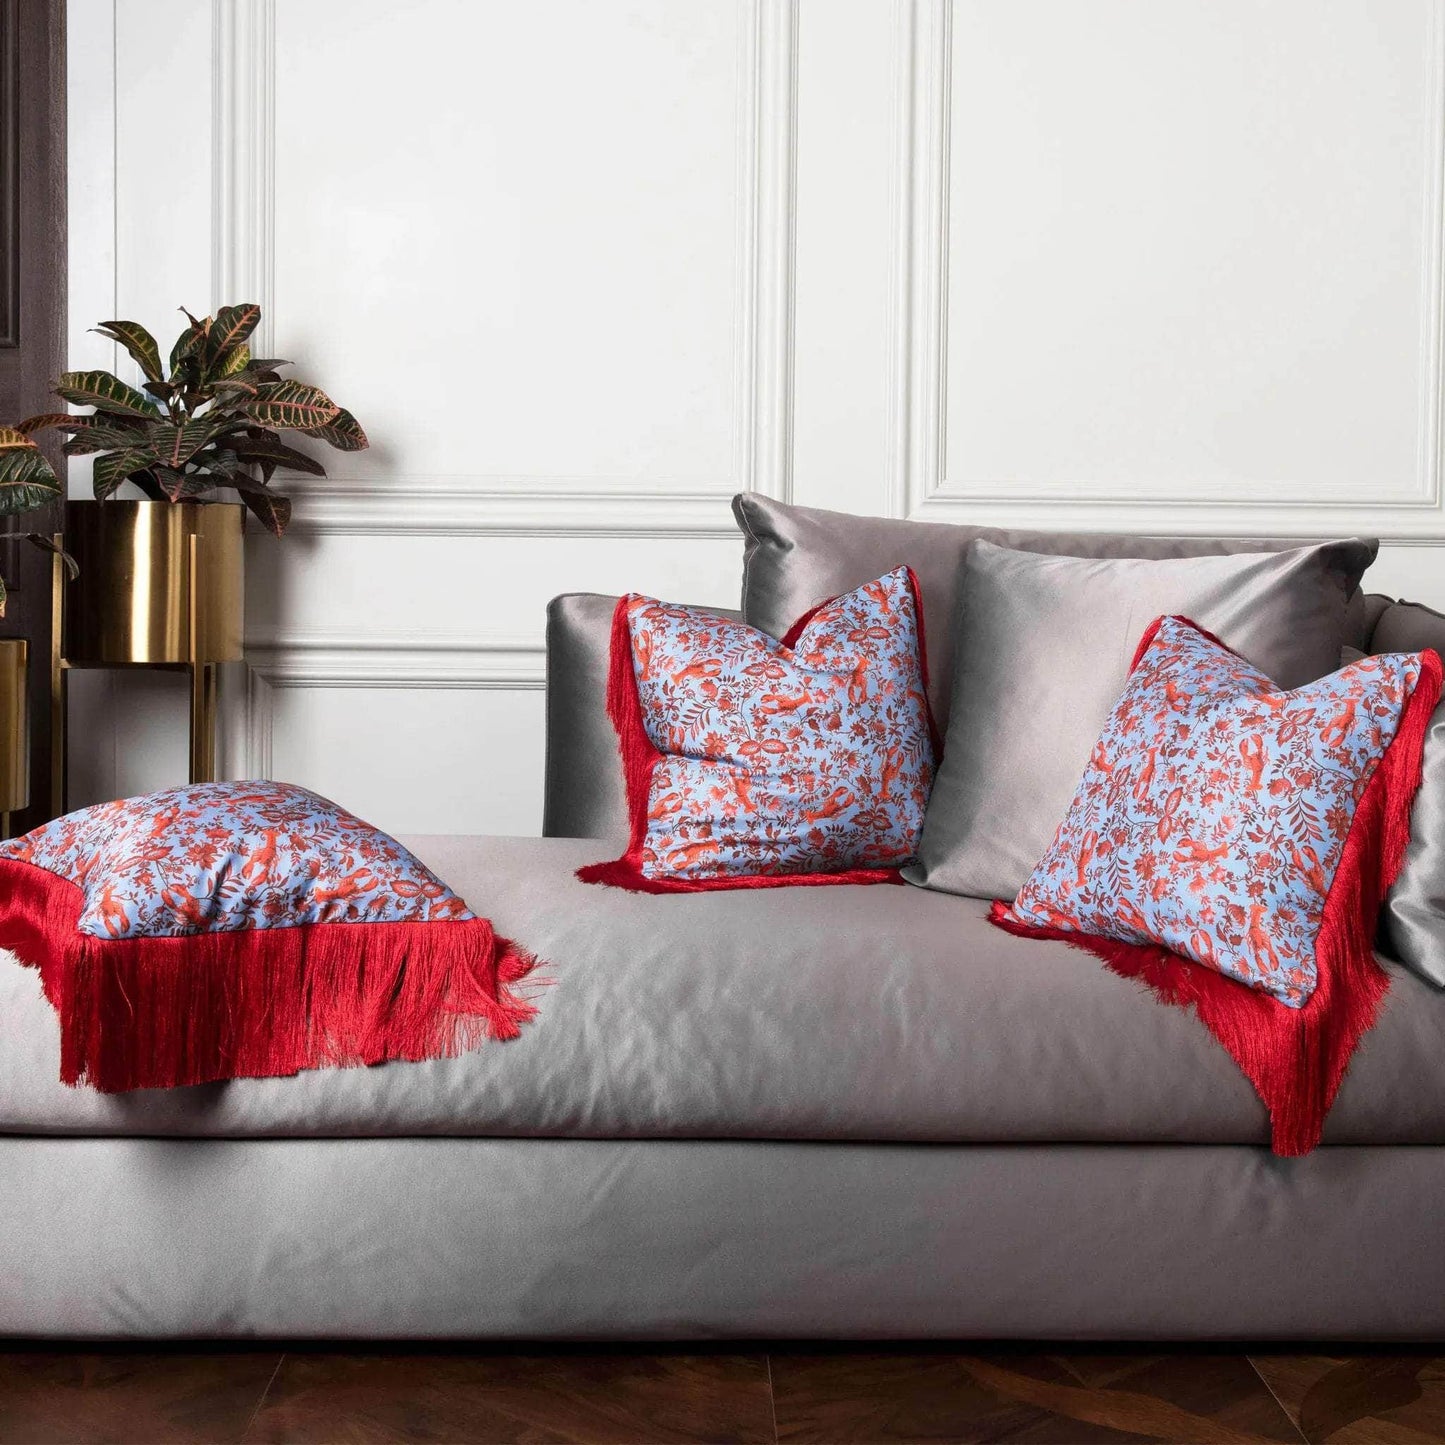 Silk Twill and Velvet Red Lobster-Print Cushion with Fringes